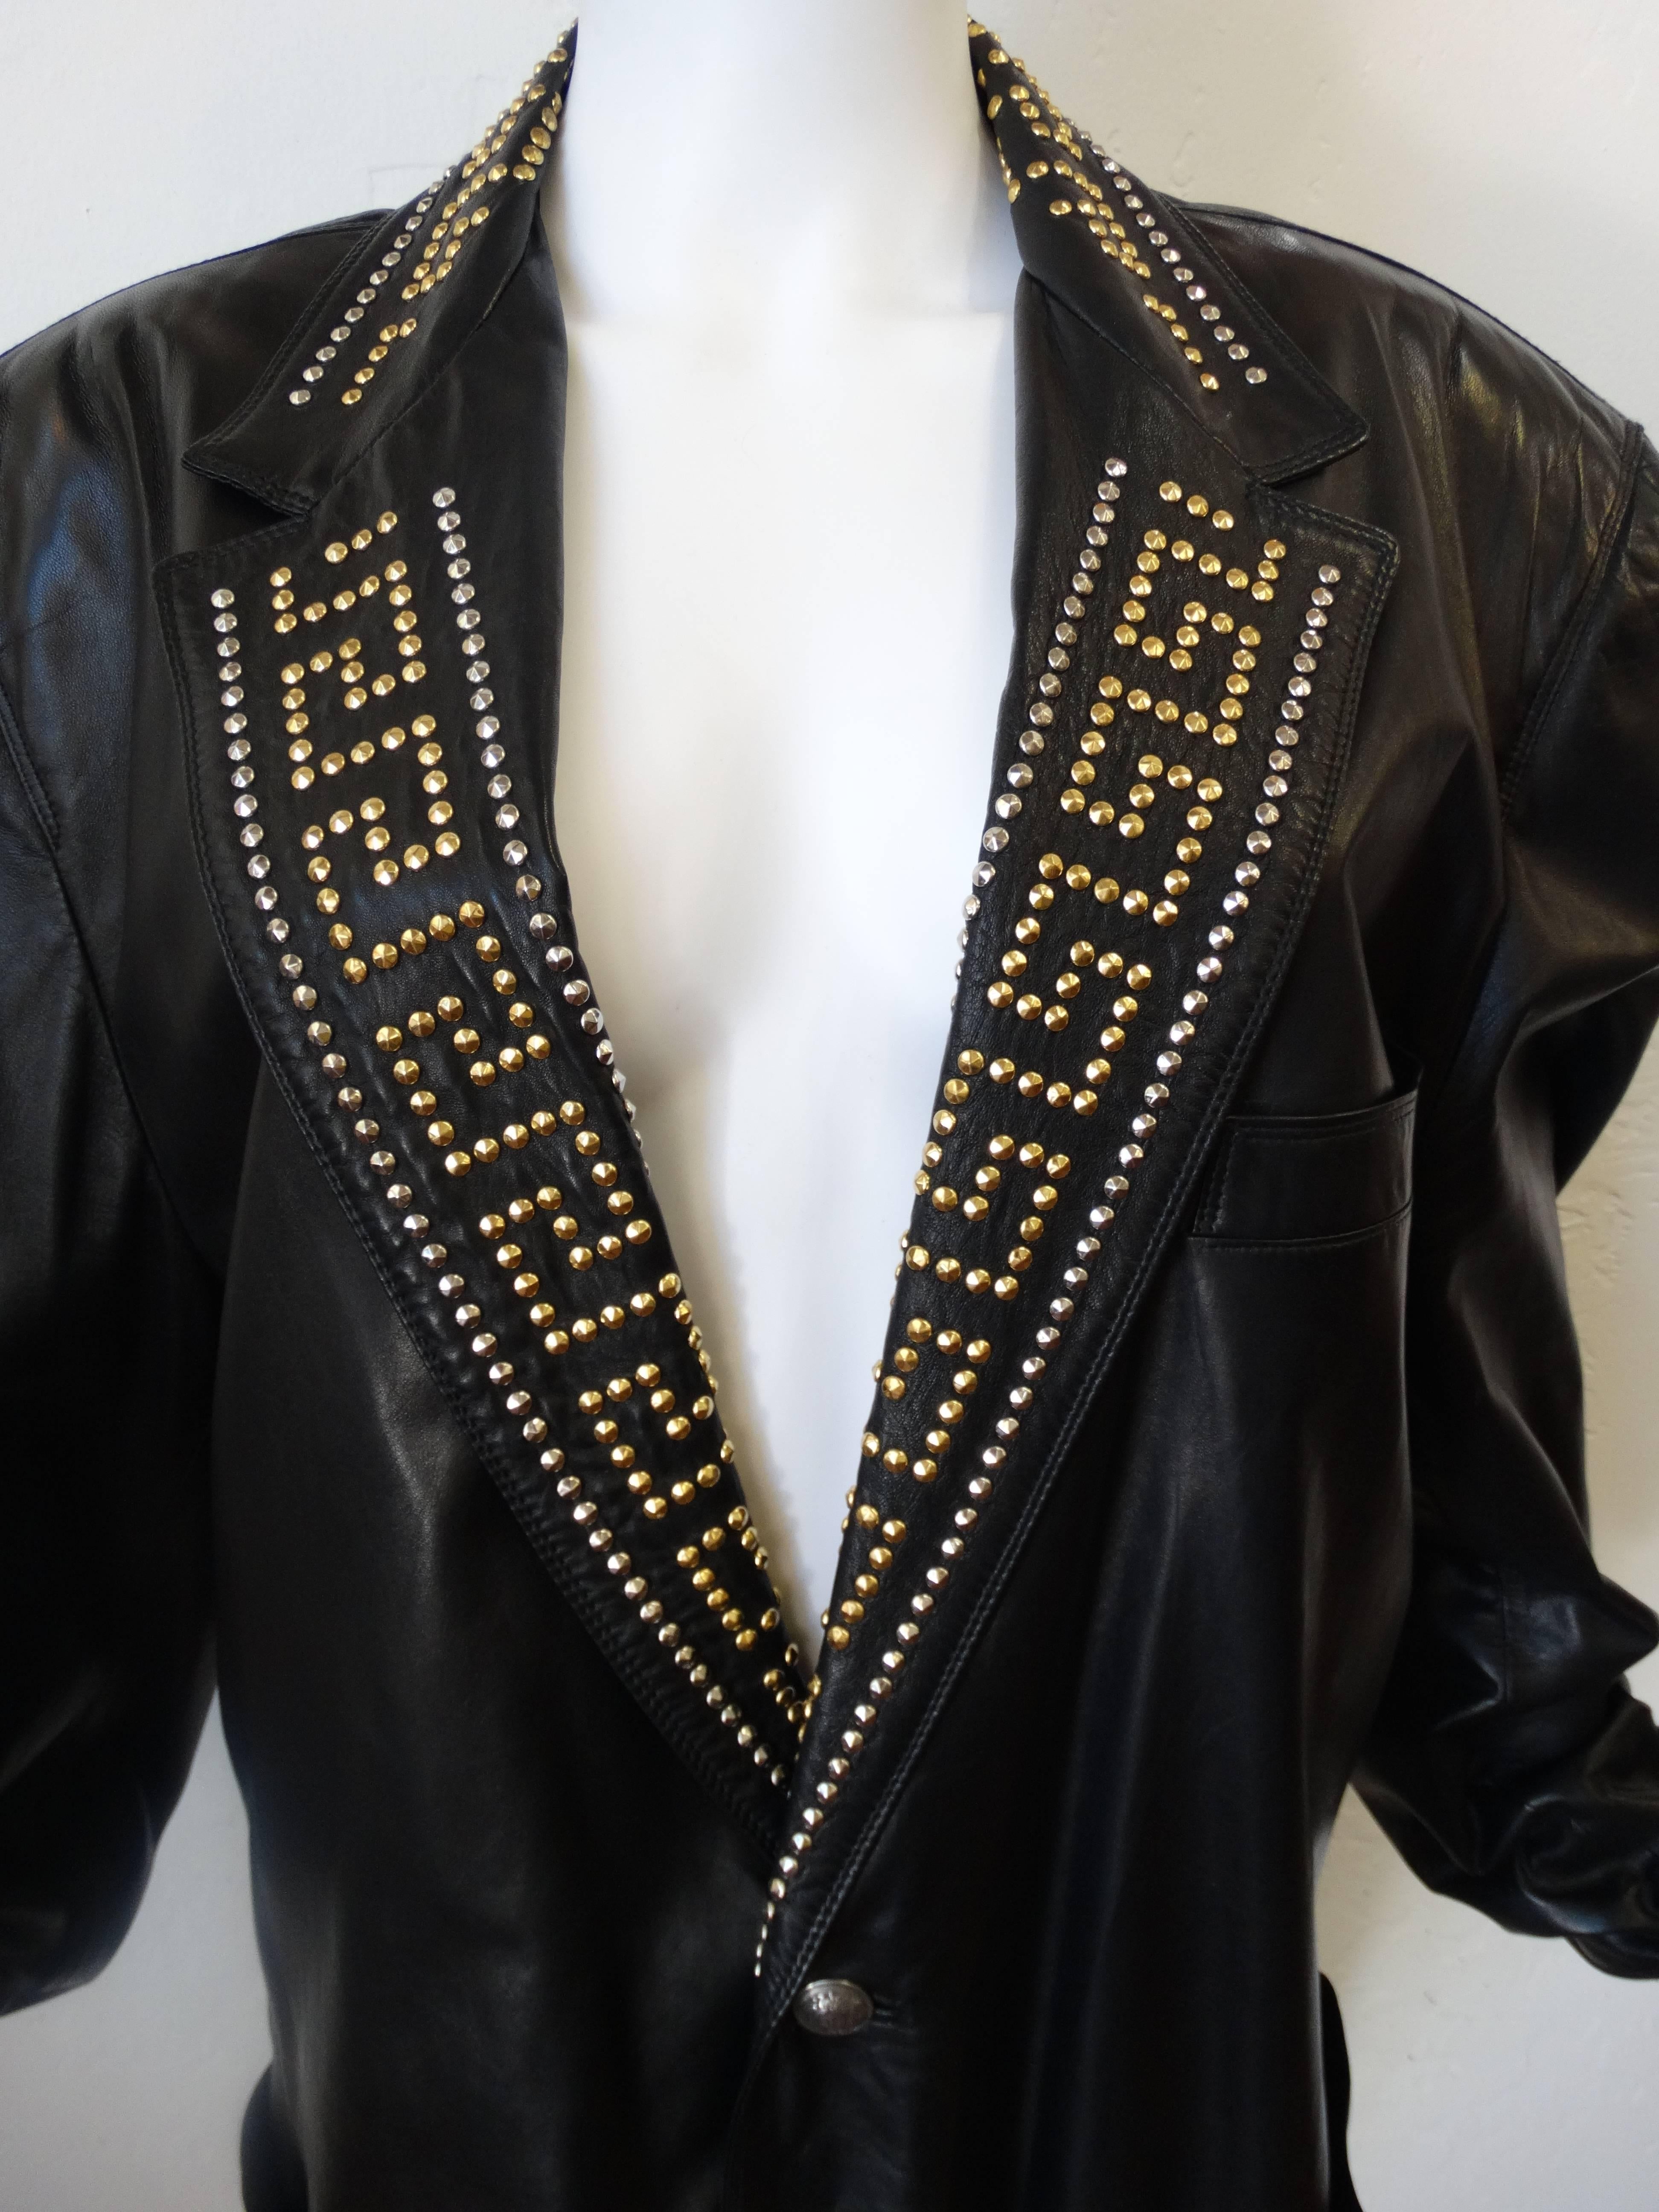 Stunning 1992 Mens Gianni Versace Greek Key studded leather jacket. 2 single medusa head buttons in front. Gold and silver studs in a Greek key pattern along the collar. Classic cut size Ita 48 butter soft leather lined in Versace print silk.